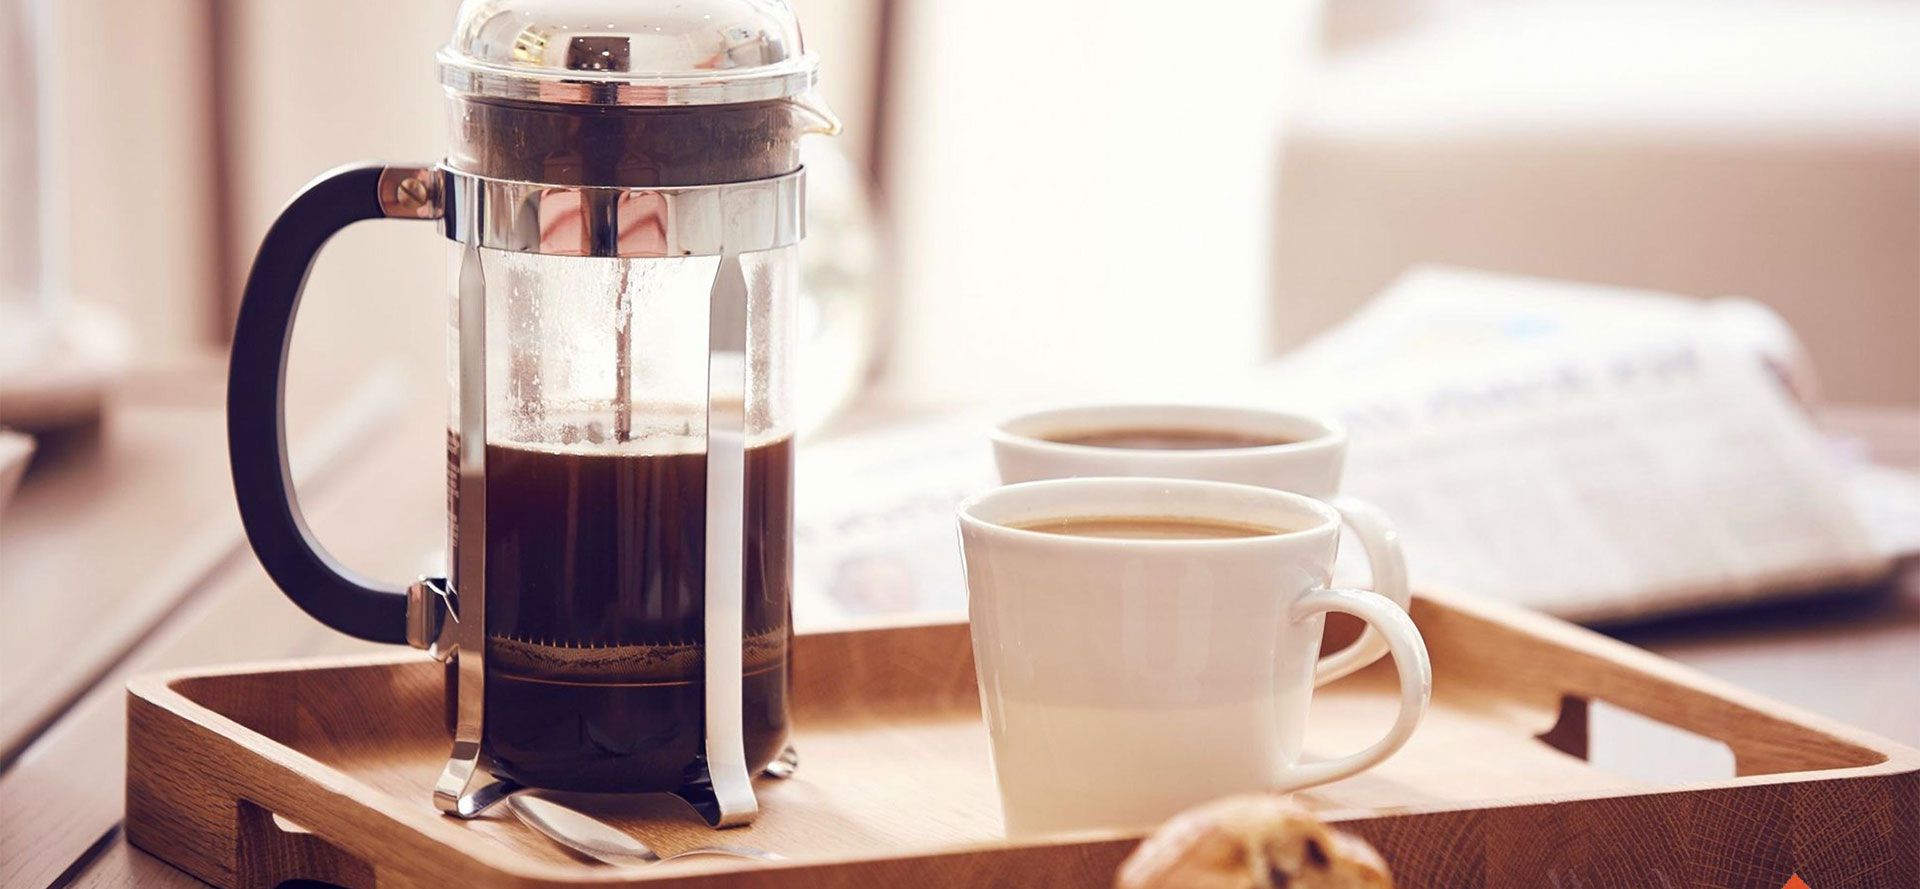 Brewed Coffee In A French Press.